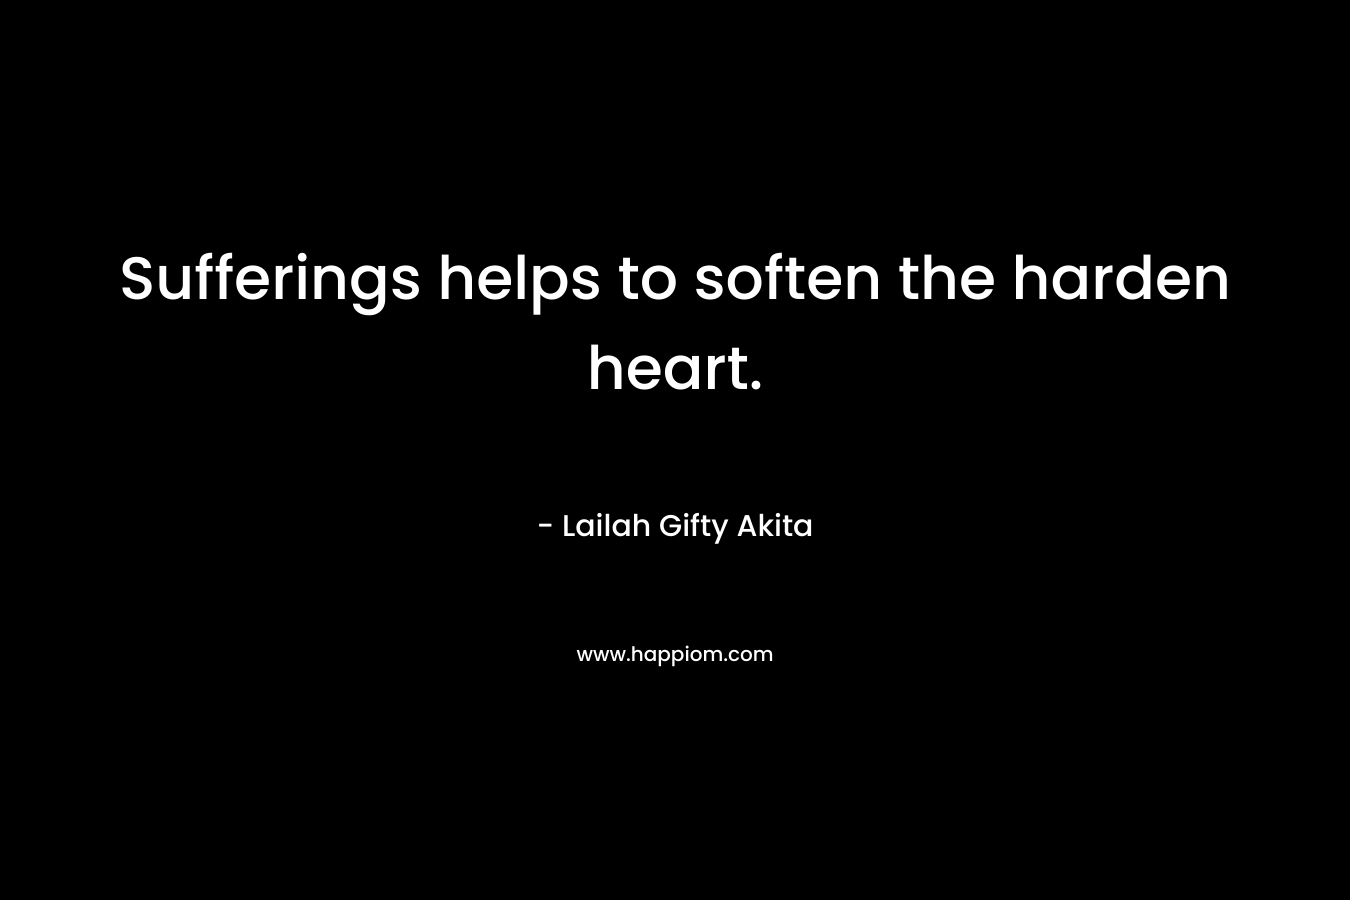 Sufferings helps to soften the harden heart. – Lailah Gifty Akita